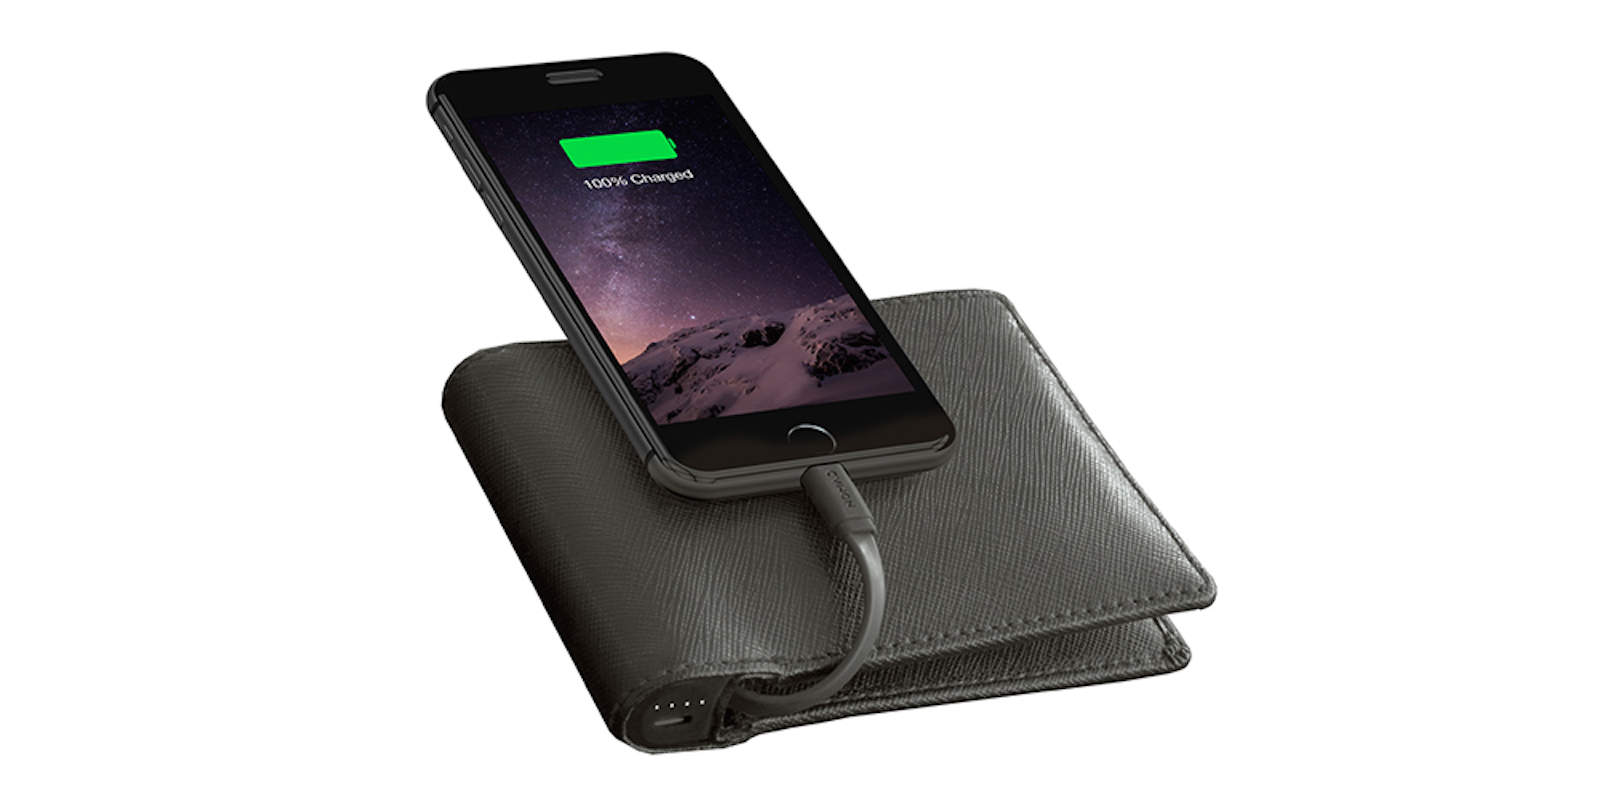 This slick leather wallet hides a secret power -- the ability to charge your phone.